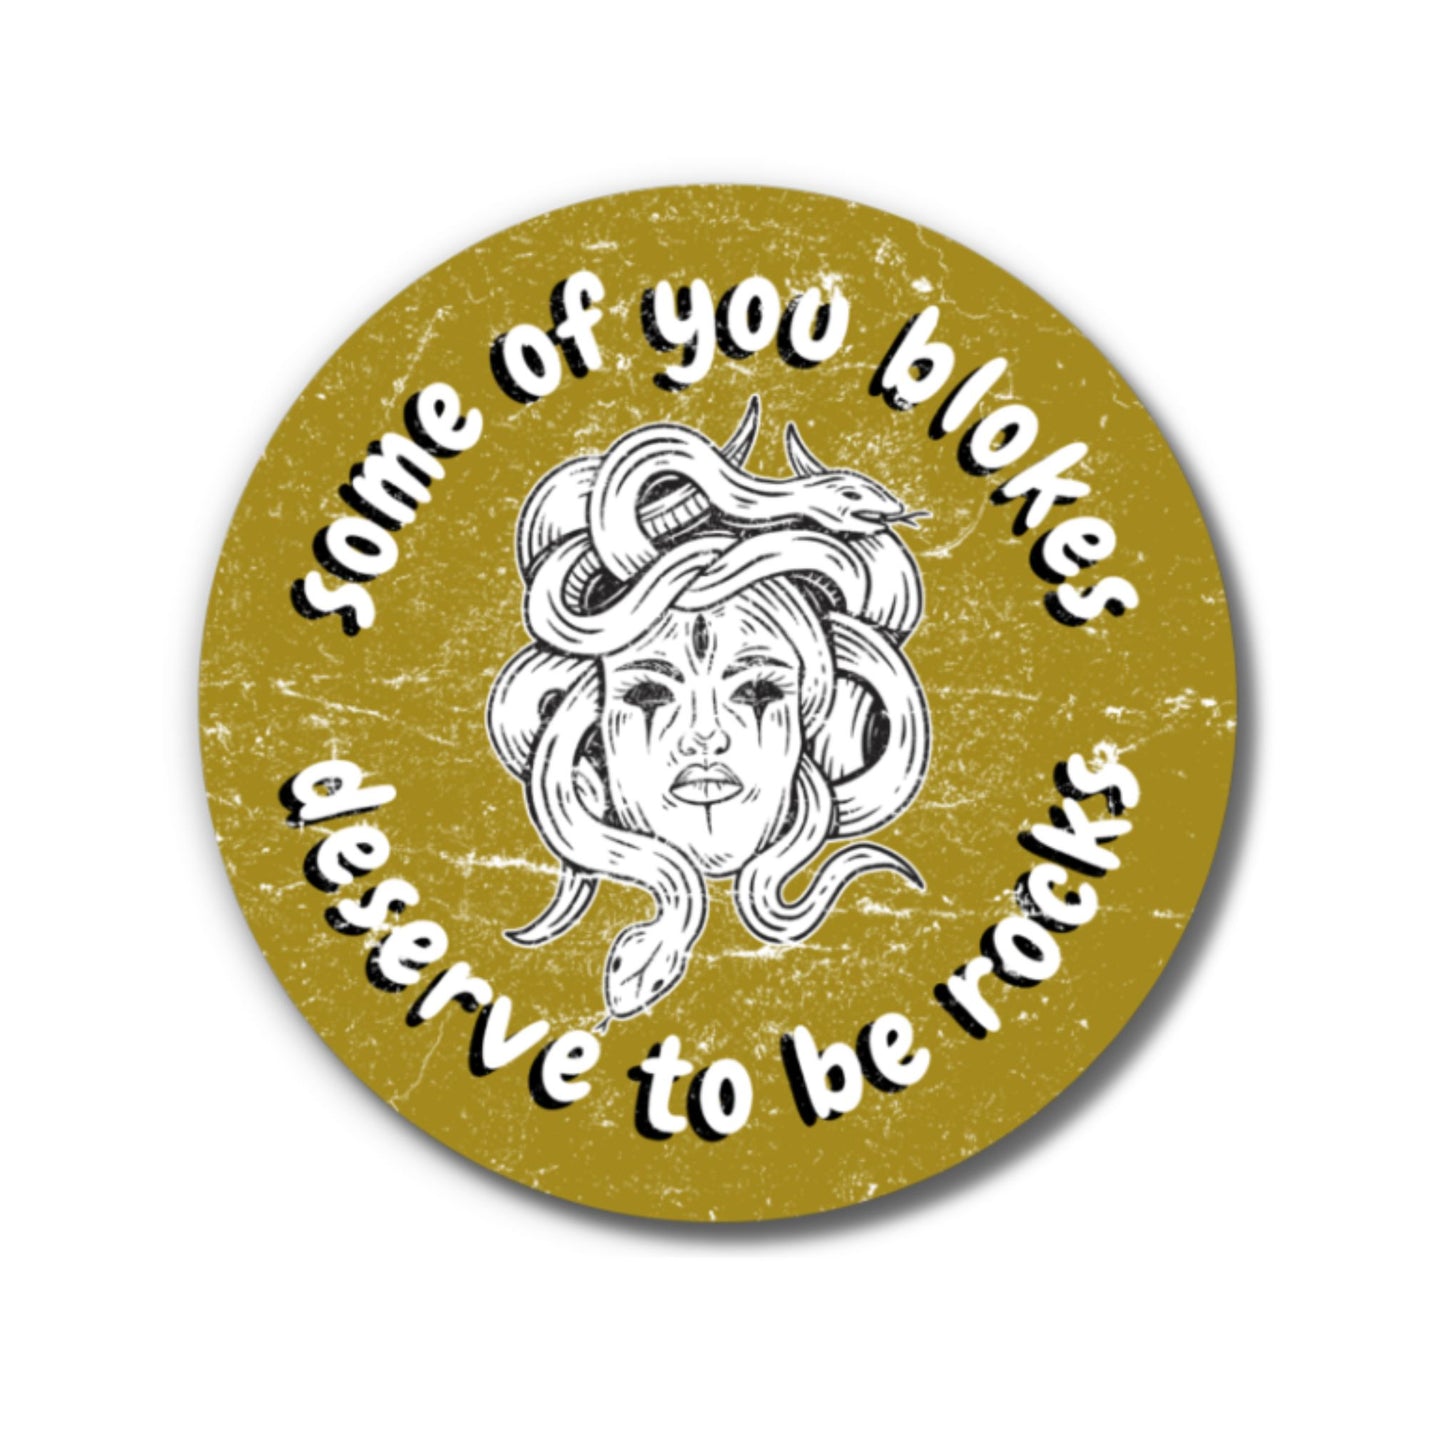 Medusa Some Of You Blokes Deserve to Be Rocks Sticker | Vinyl Die Cut Decal